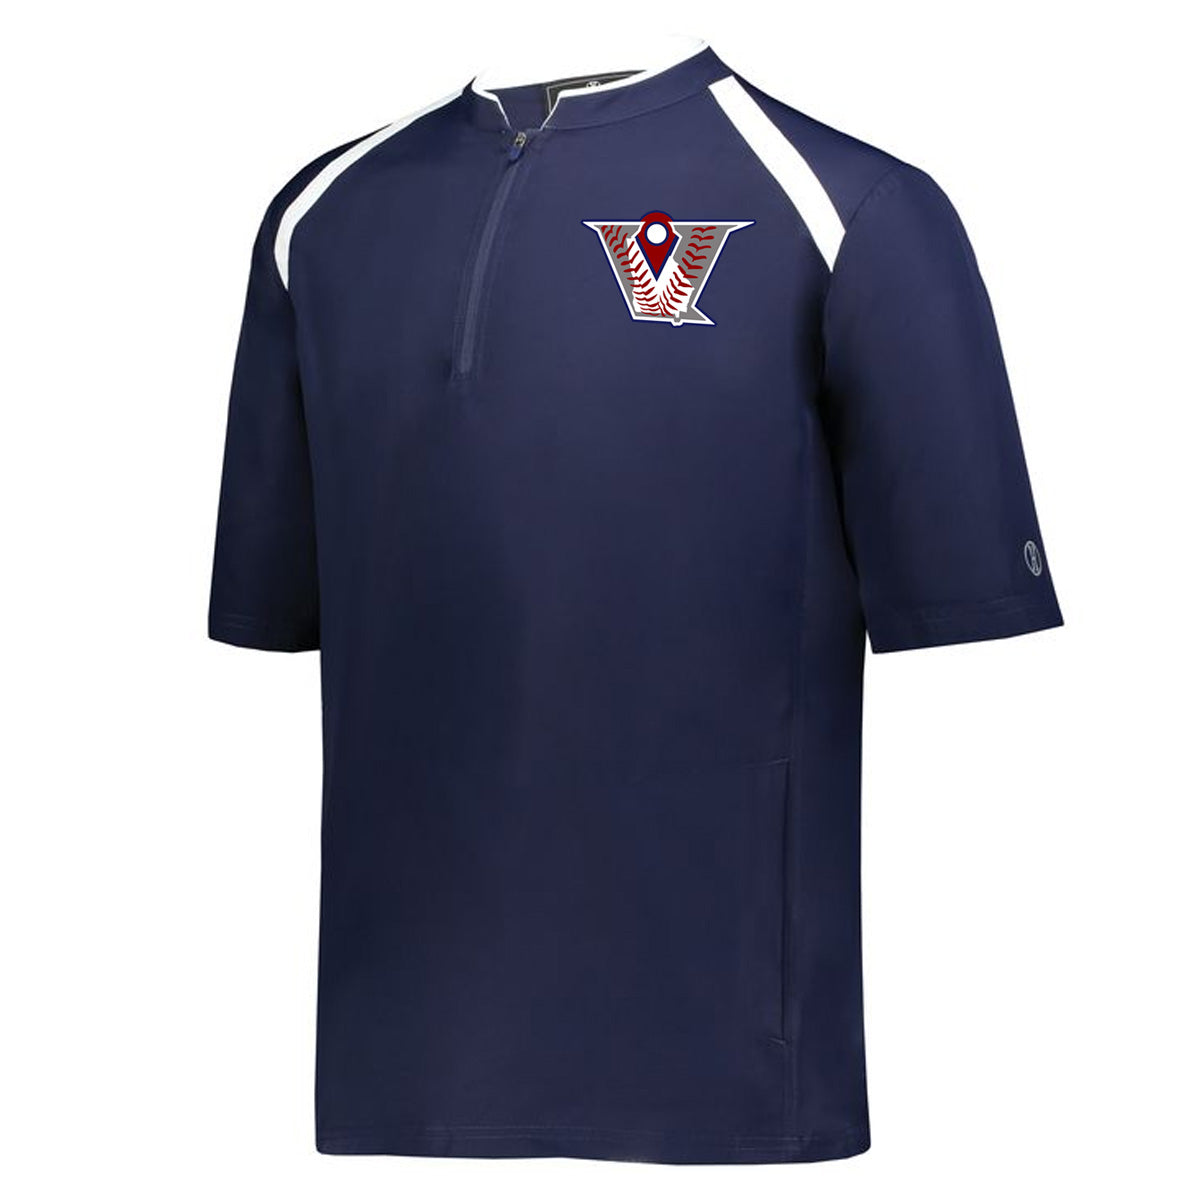 Velo BB - Clubhouse Short Sleeve Cage Jacket - Navy/White (229581/229681) - Southern Grace Creations